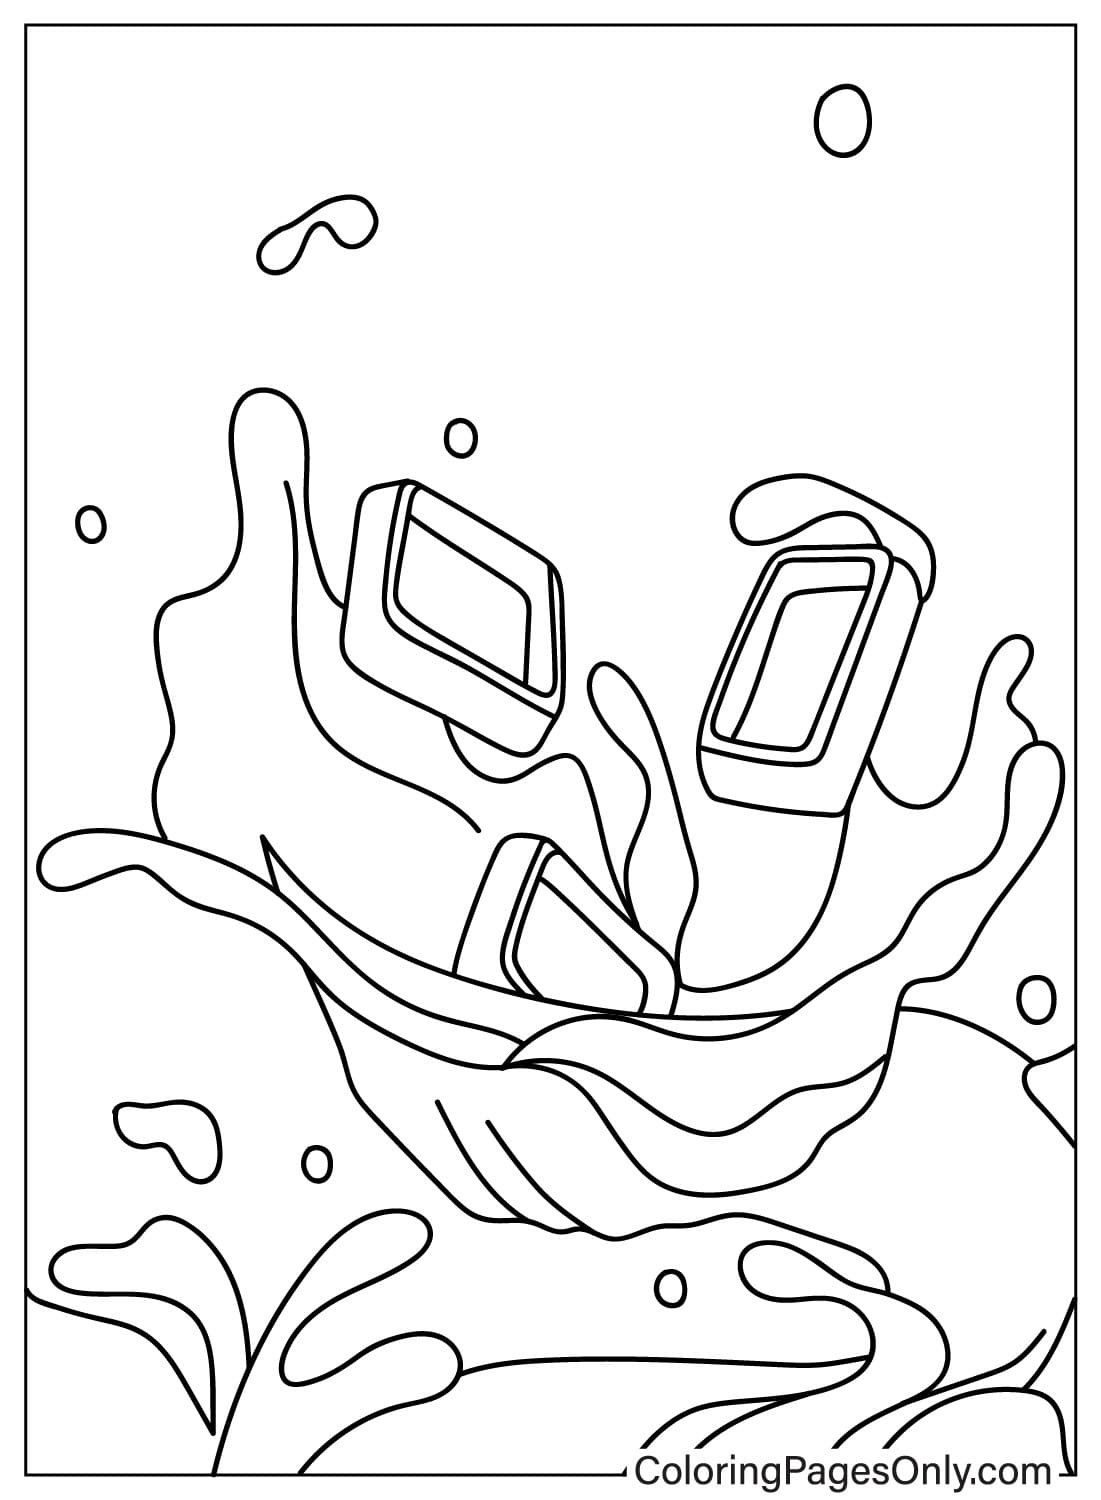 Chocolate Coloring Pages to Download from Chocolate